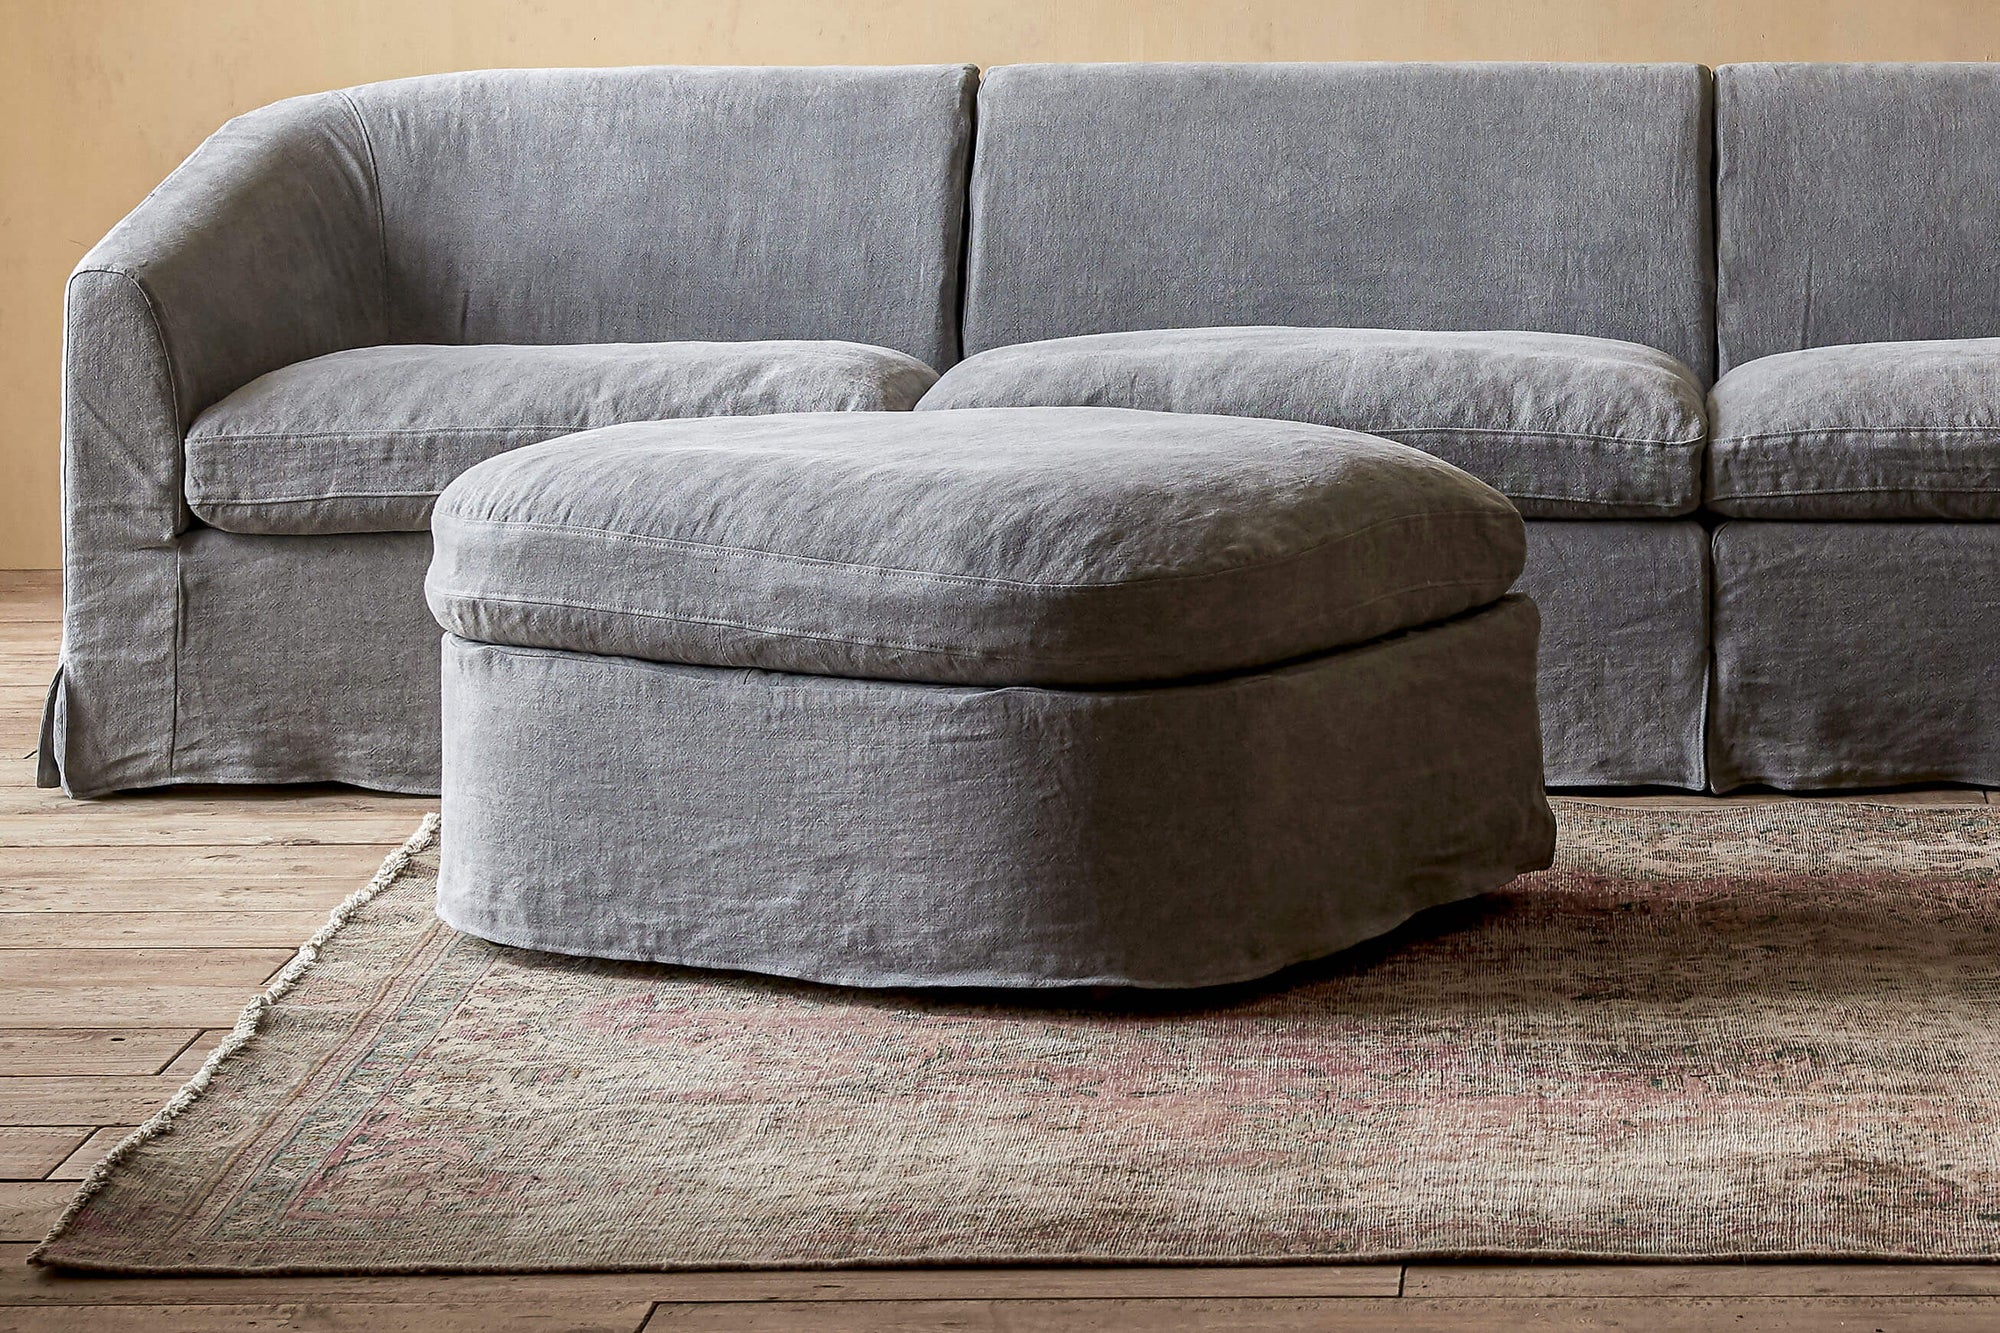 Ziki Sectional Ottoman in Ink Cap, a medium cool grey Light Weight Linen, placed on a rug in front of the Ziki Sectional Sofa